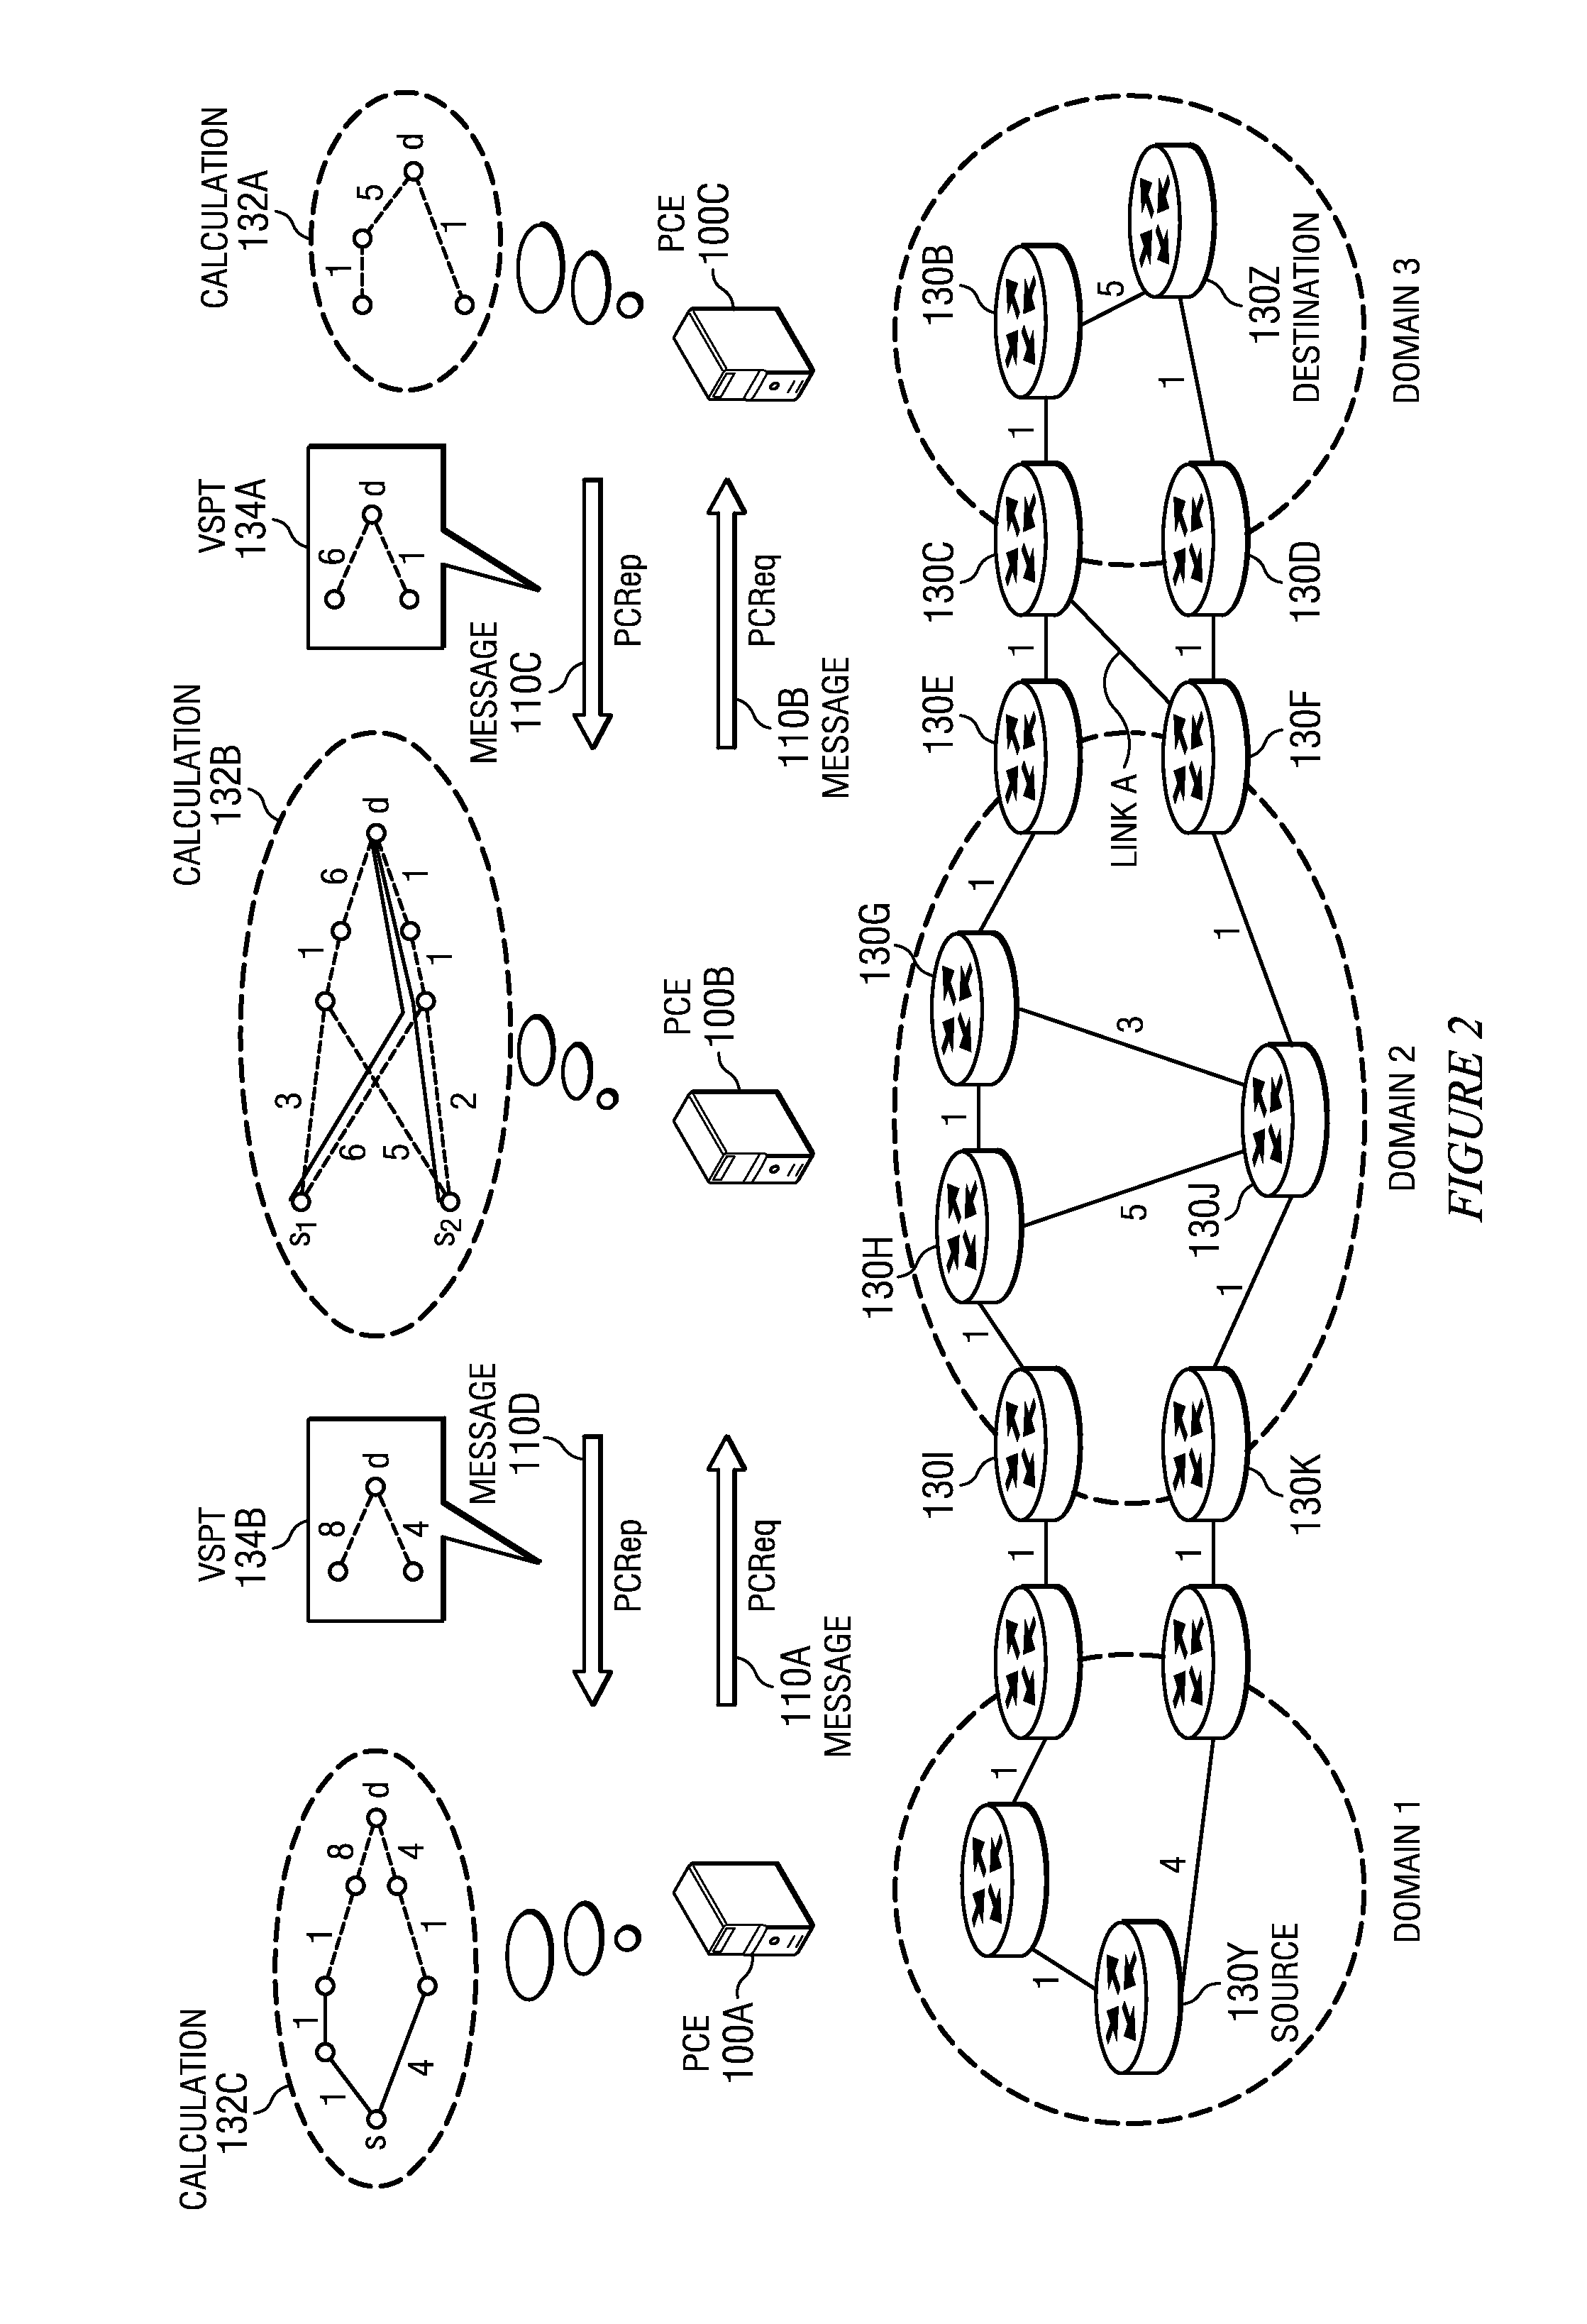 Systems and methods for determining protection paths in a multi-domain network